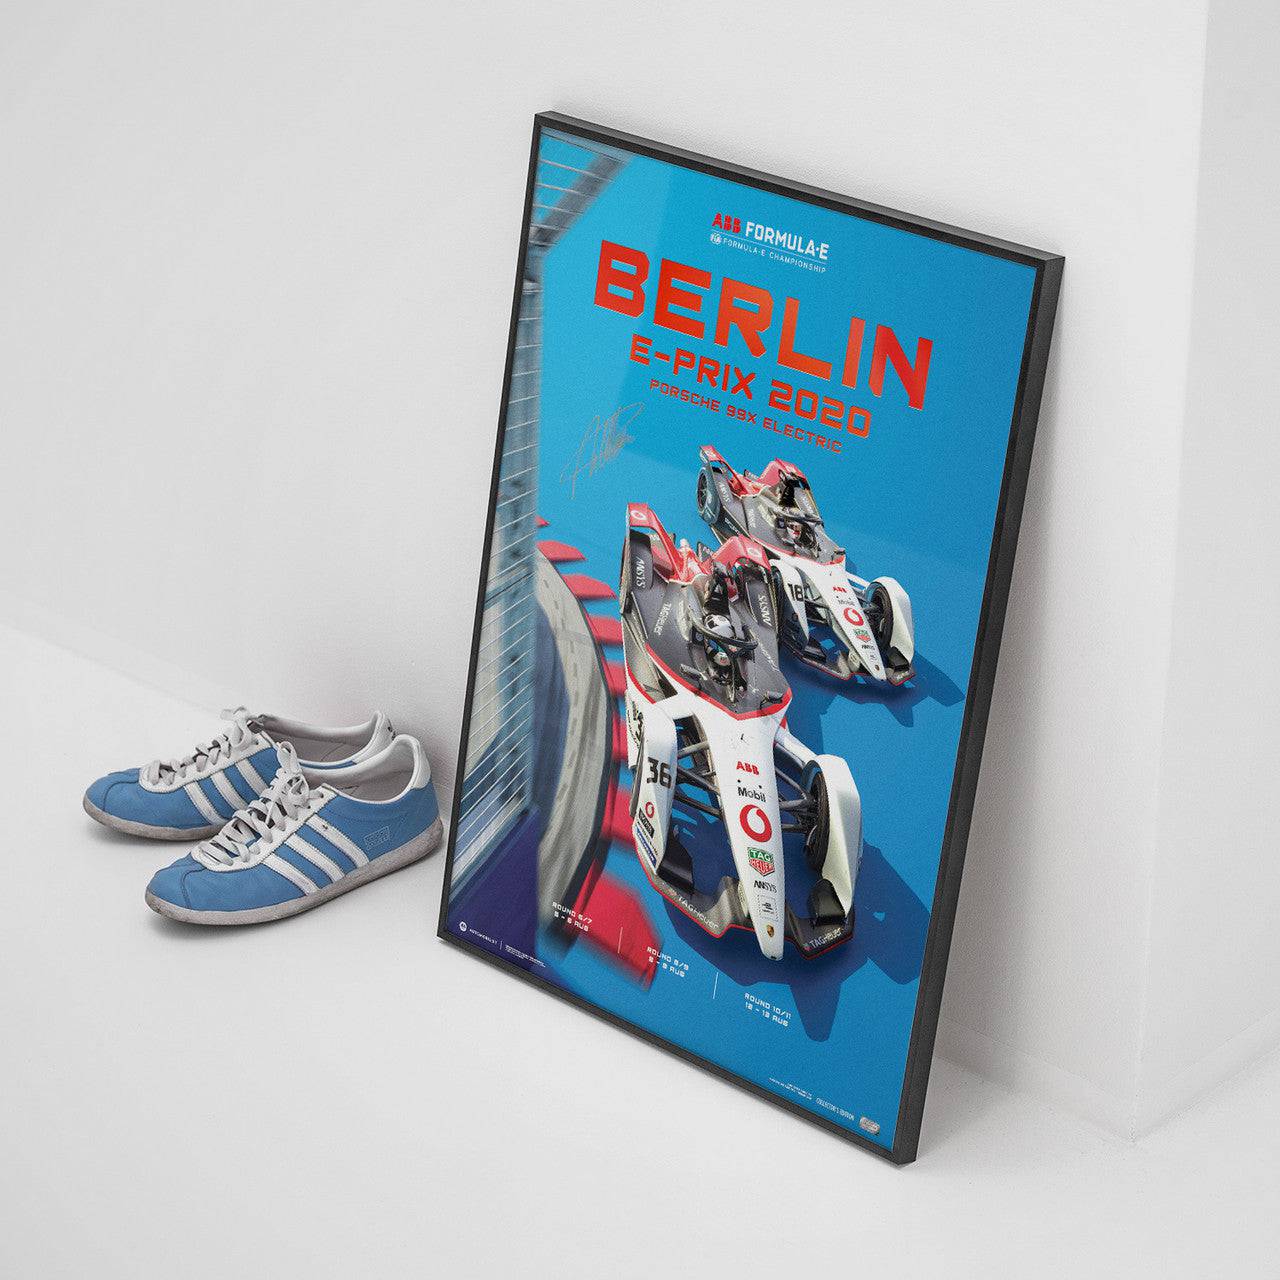 André Lotterer - Porsche 99X Electric in Berlin 2020 | Signed Collector’s Edition